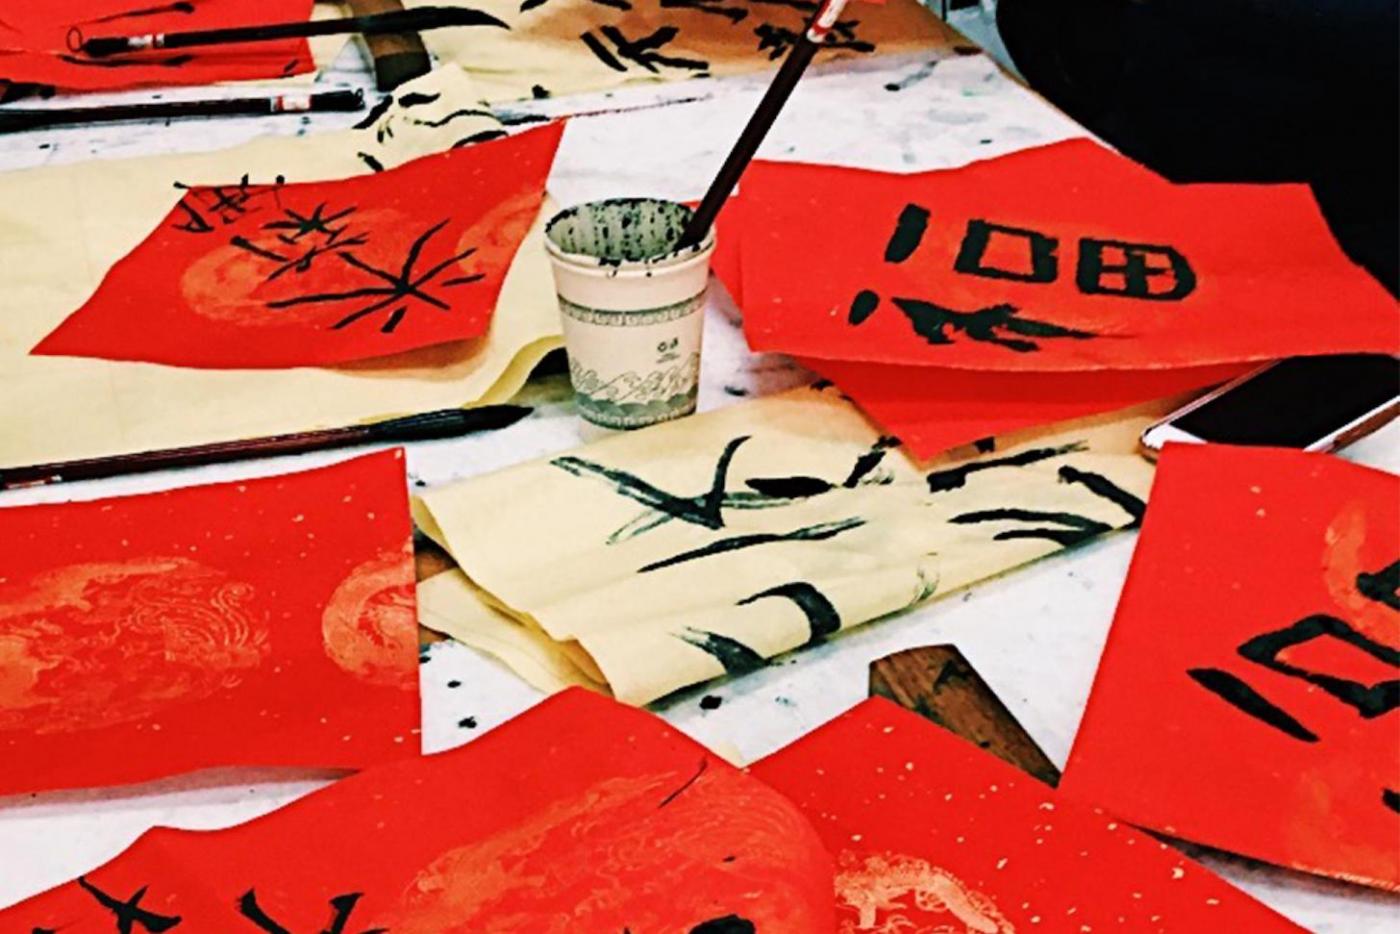 What I Learned from Chinese Calligraphy Class - Verge Magazine